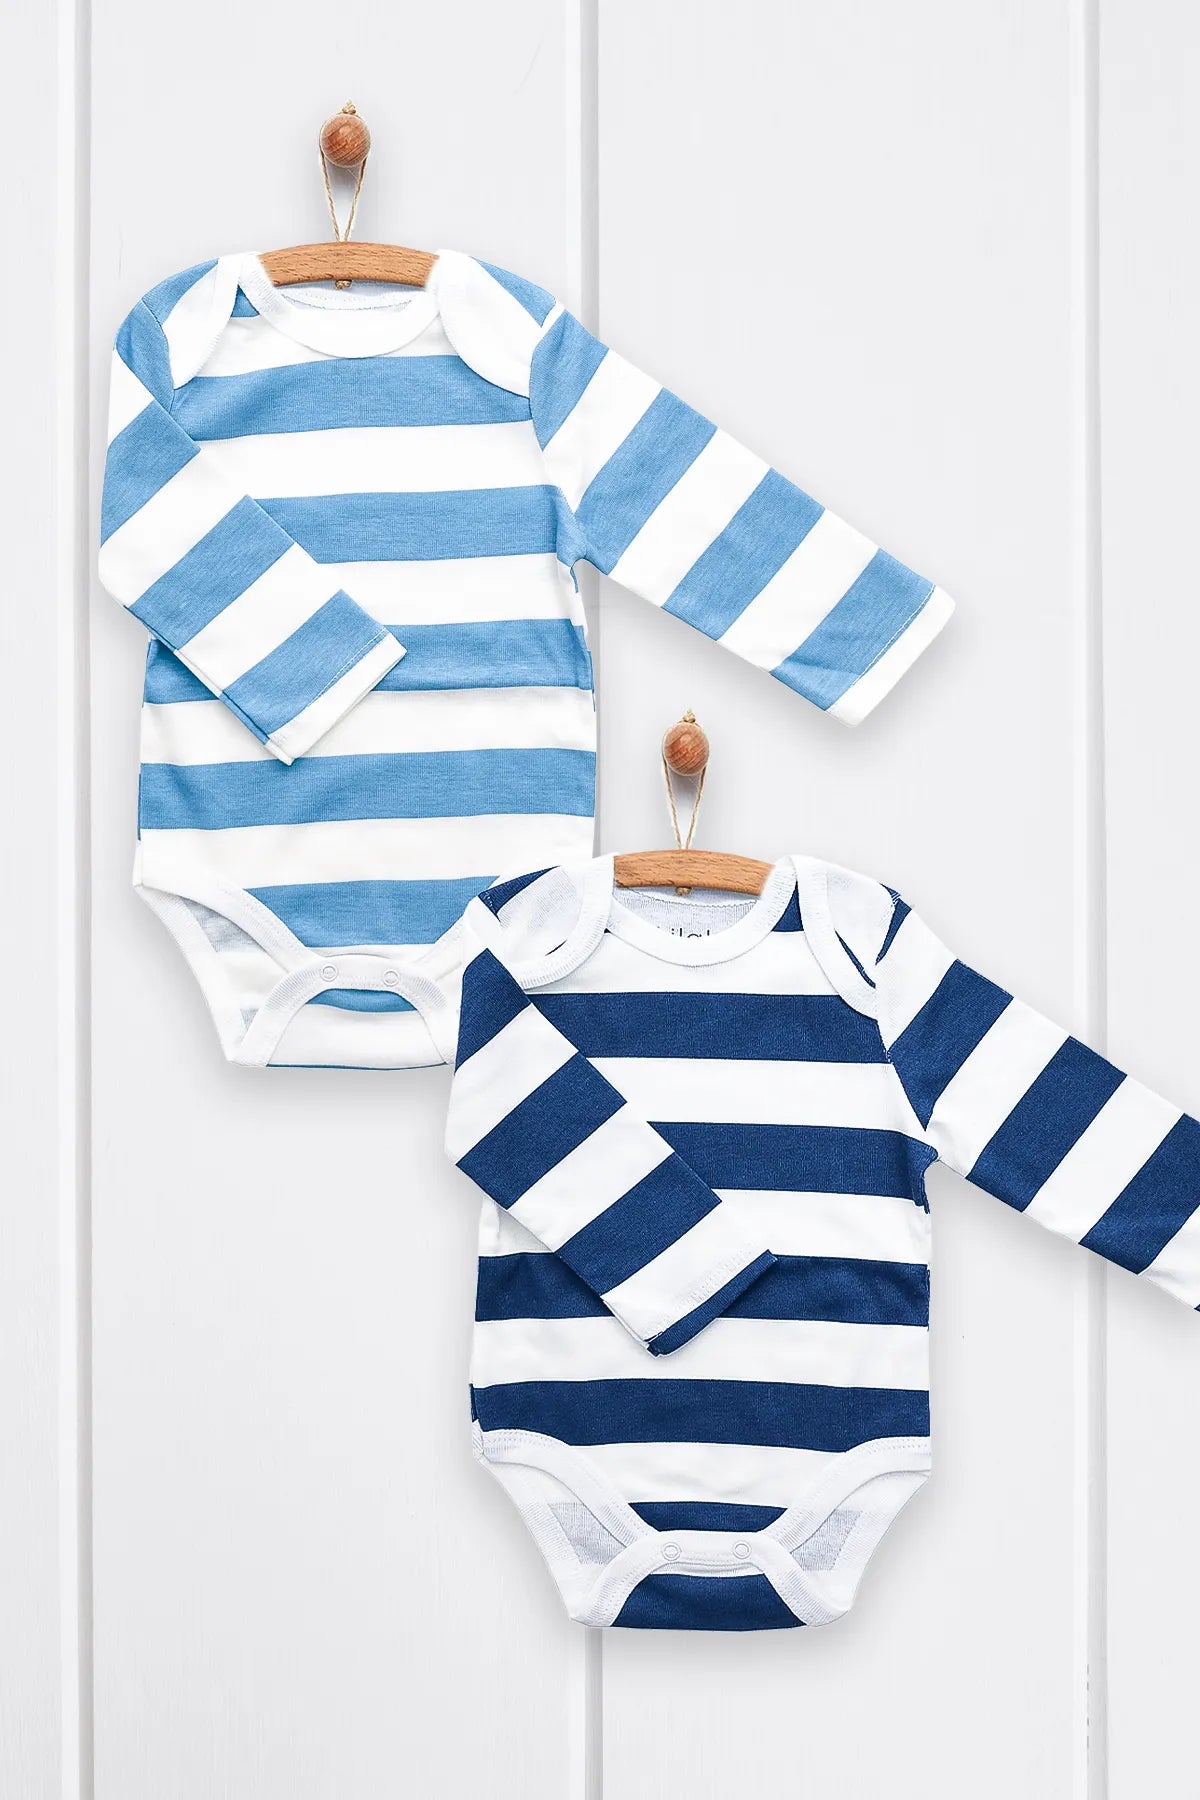 100% Cotton 2-Piece Long Sleeve Striped Baby Bodysuit Set for Newborn to 9 Months - Unisex, Organic, and Machine Washable